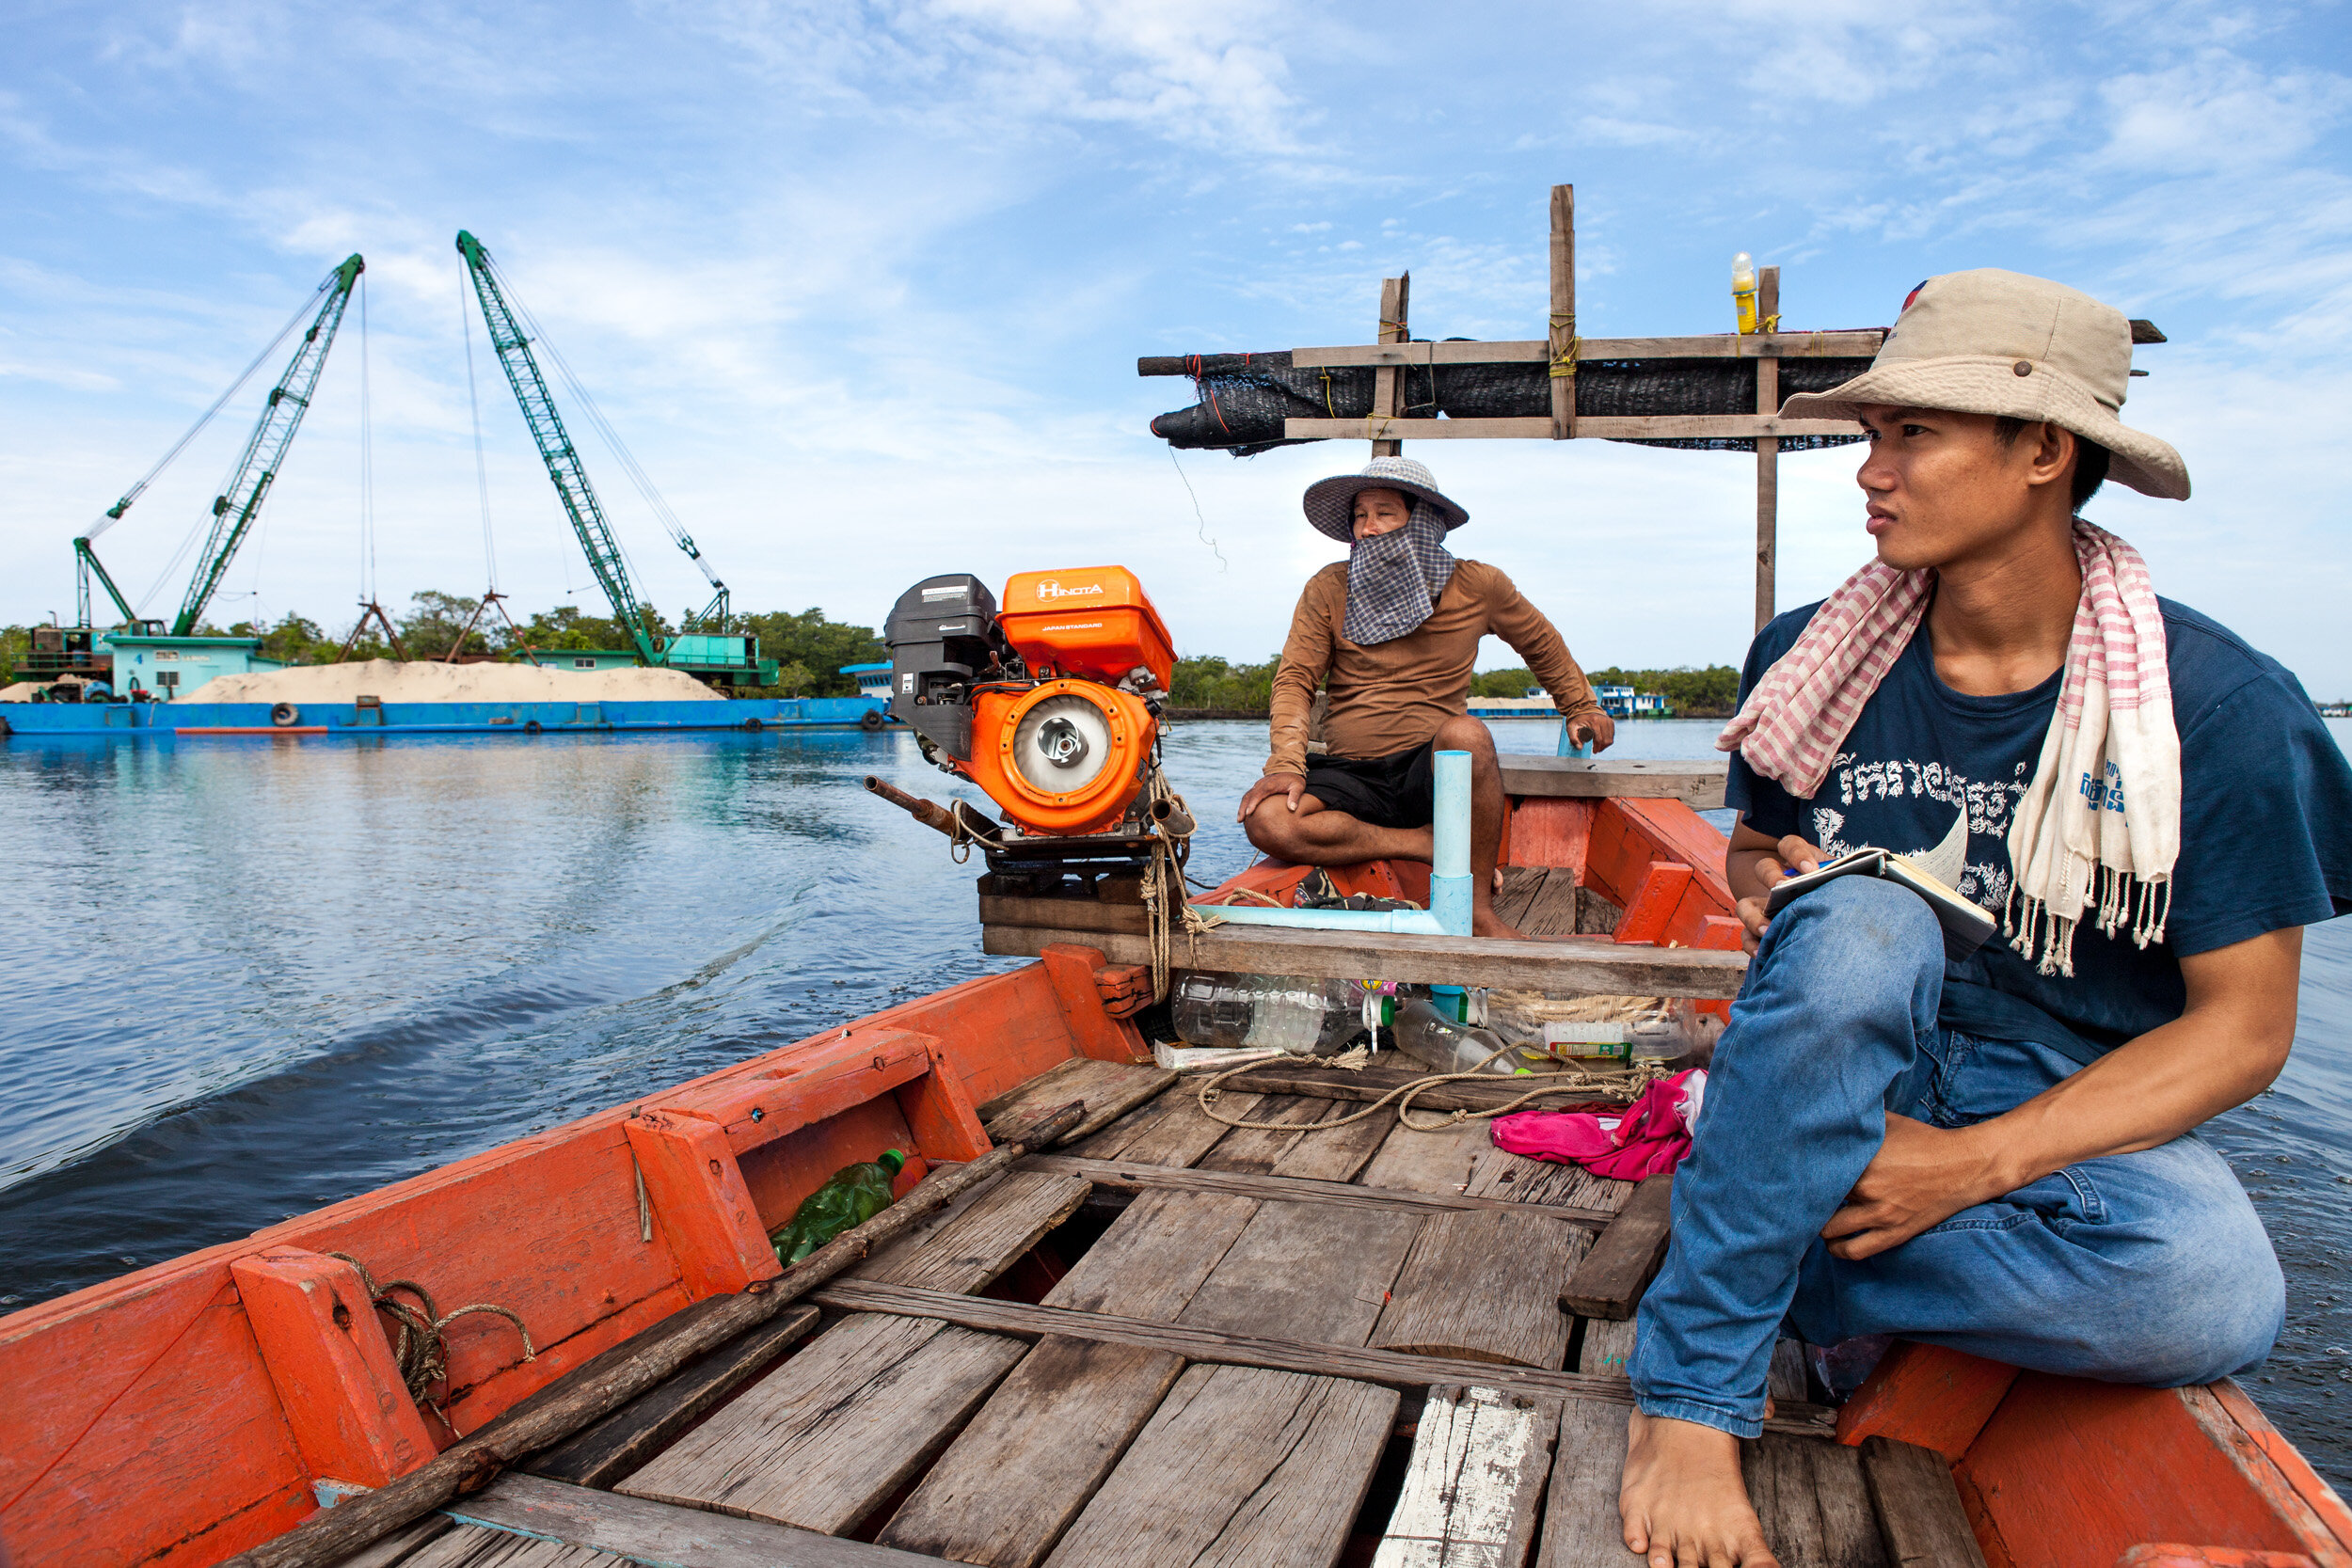  Phen Sophany and Mot Kimry- both ‘Mother Nature’ activists- travel past moored sand dredgers as they inspect the condition of the Tatai River in Koh Kong province. 